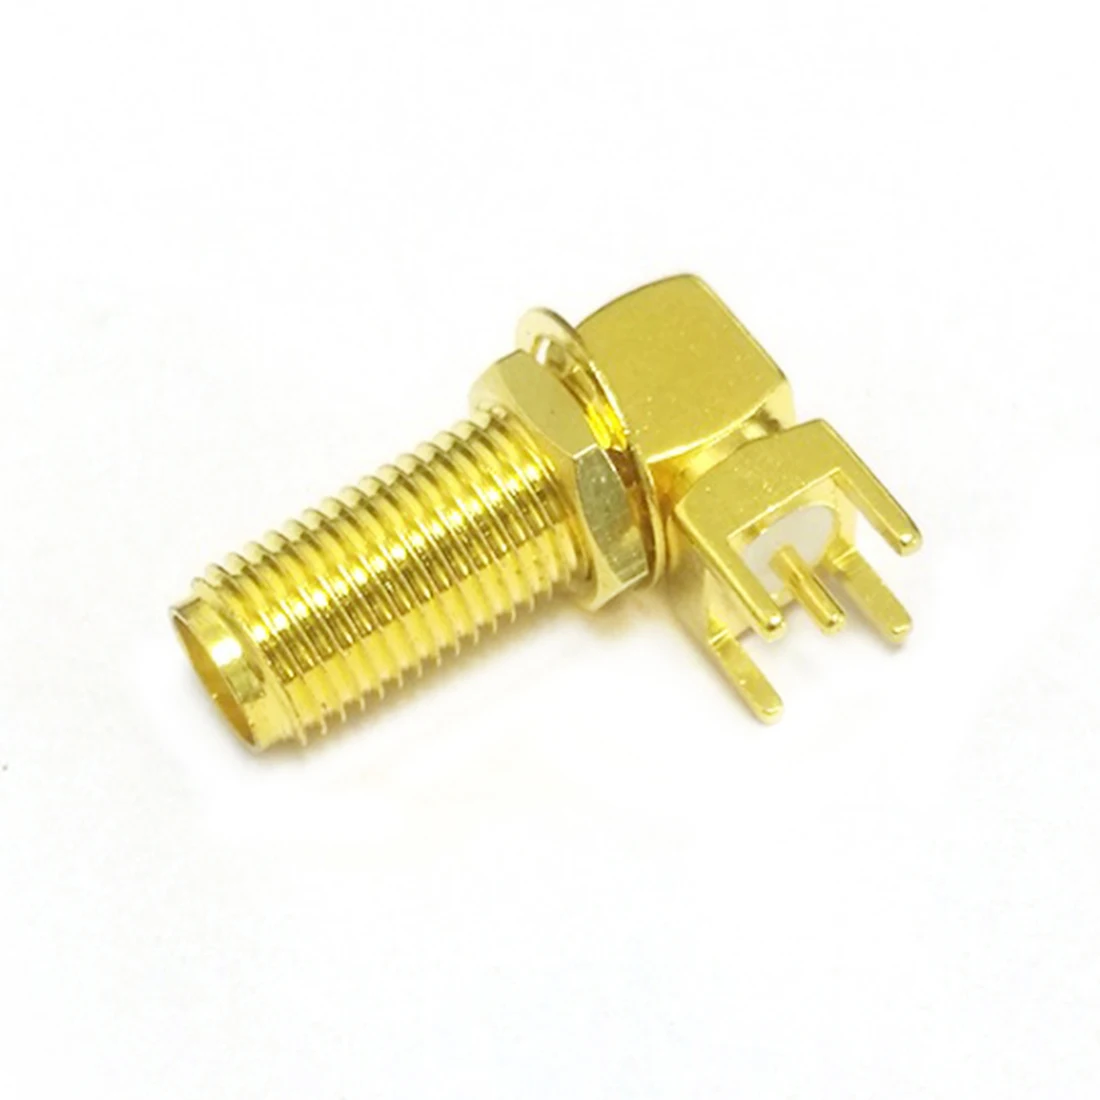 

1pc SMA Female Jack Nut RF Coax Modem Convertor Connector PCB Mount Right Angle Goldplated 14mm Thread New SMA Connector